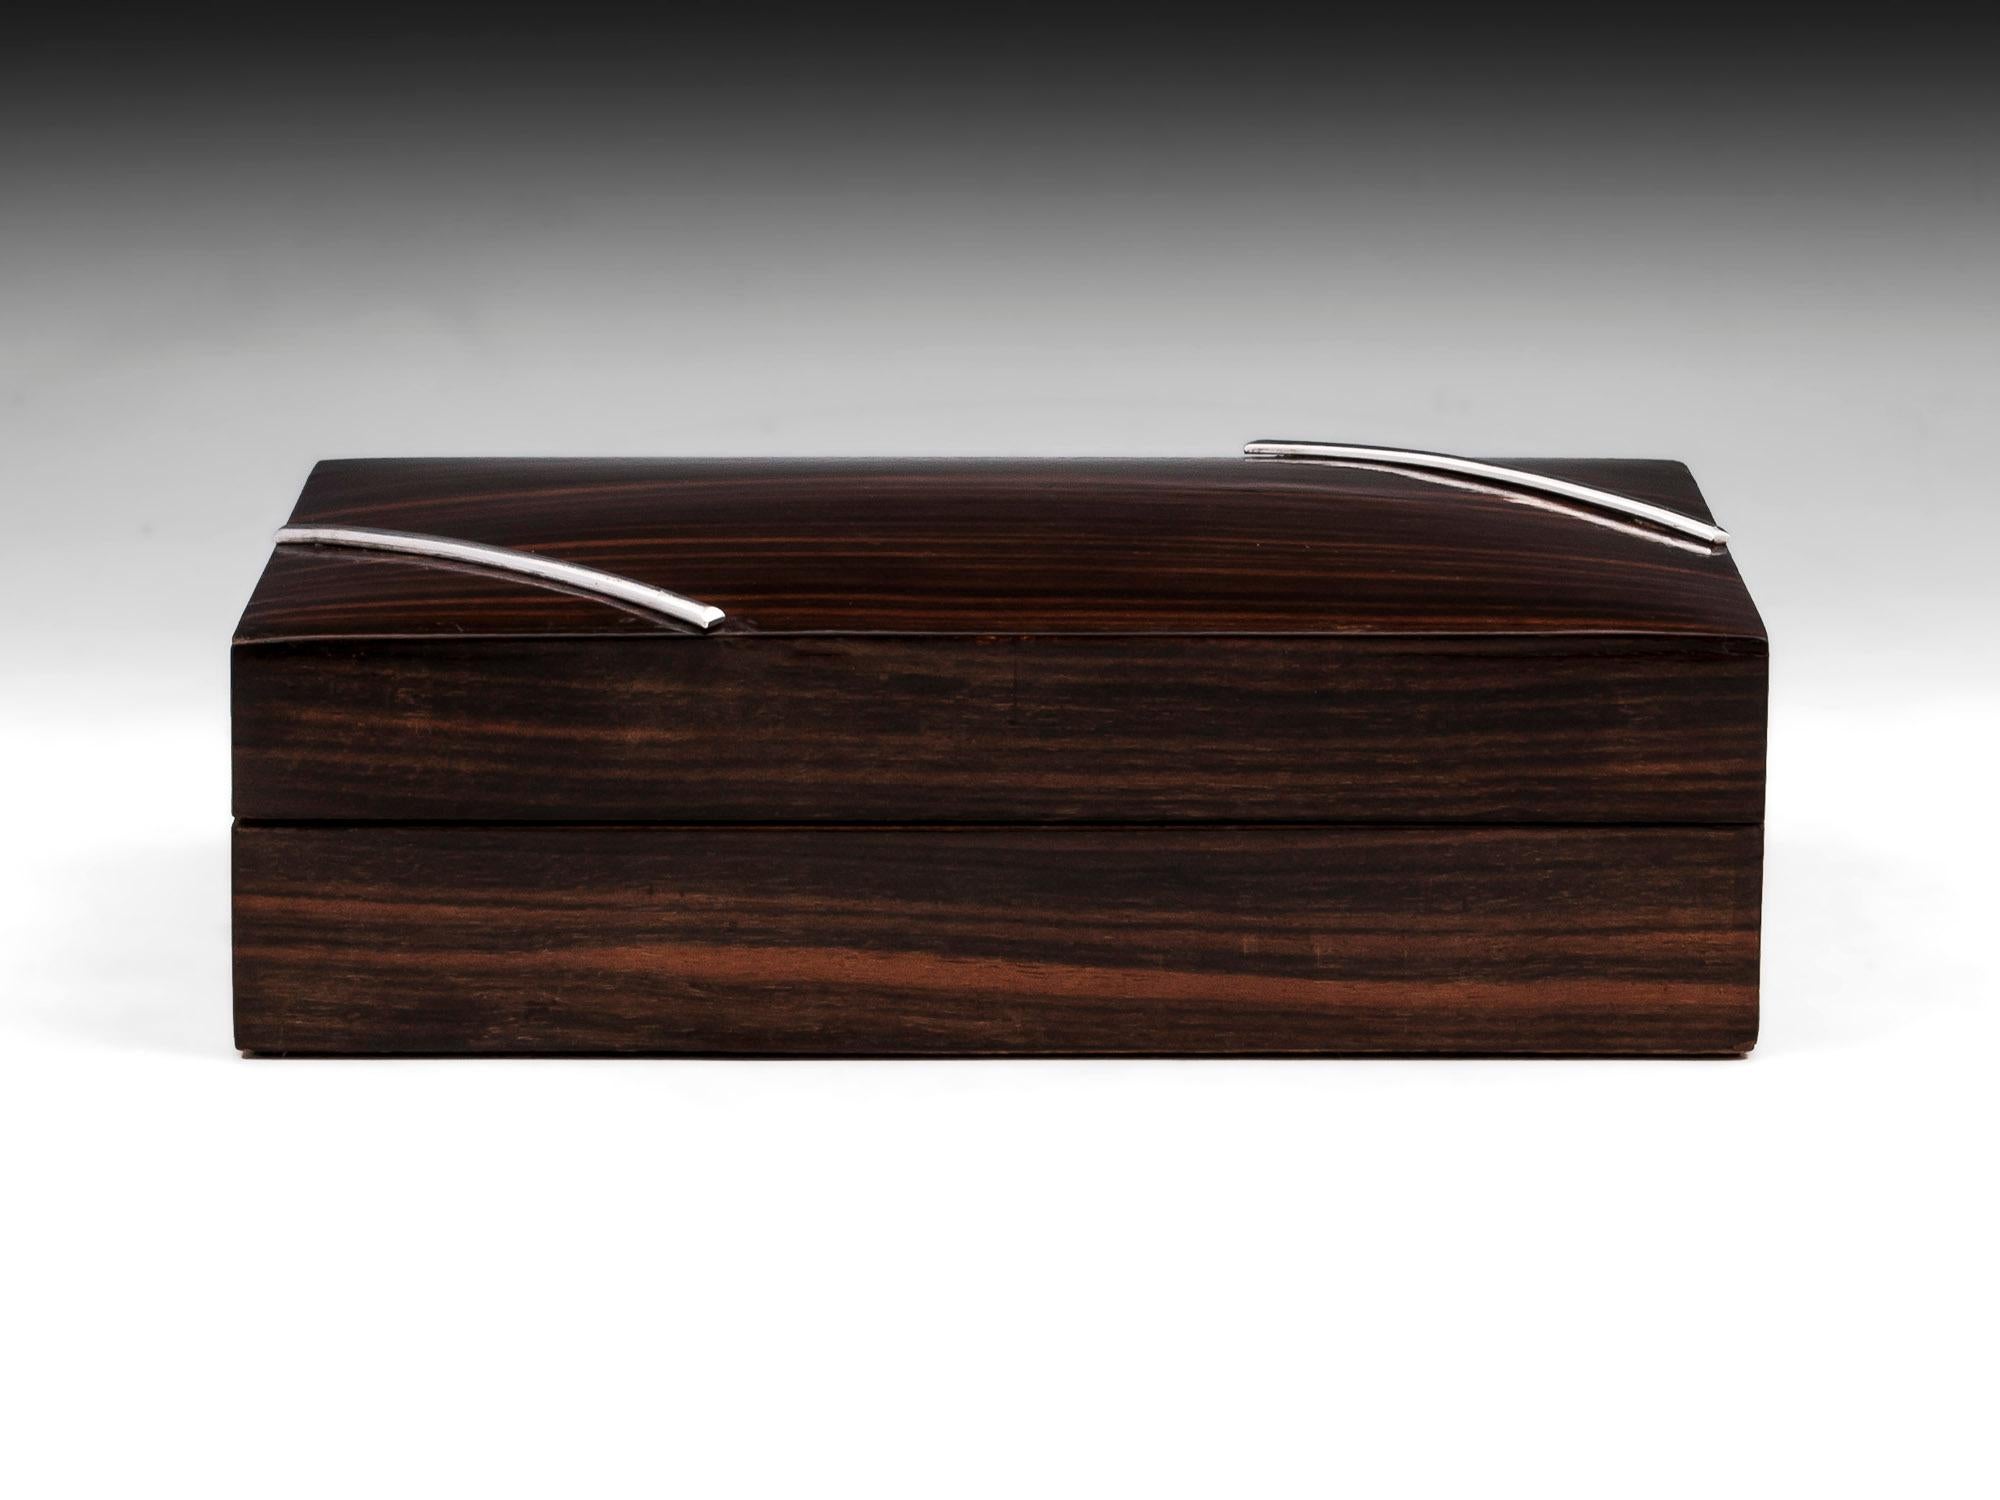 Art Deco jewelry box veneered in Macassar ebony with two silver plated half round bars angled on the top. The interior has an unusual cantilever insert with padded velvet compartments, with the box itself being lined in faux snakeskin leather.